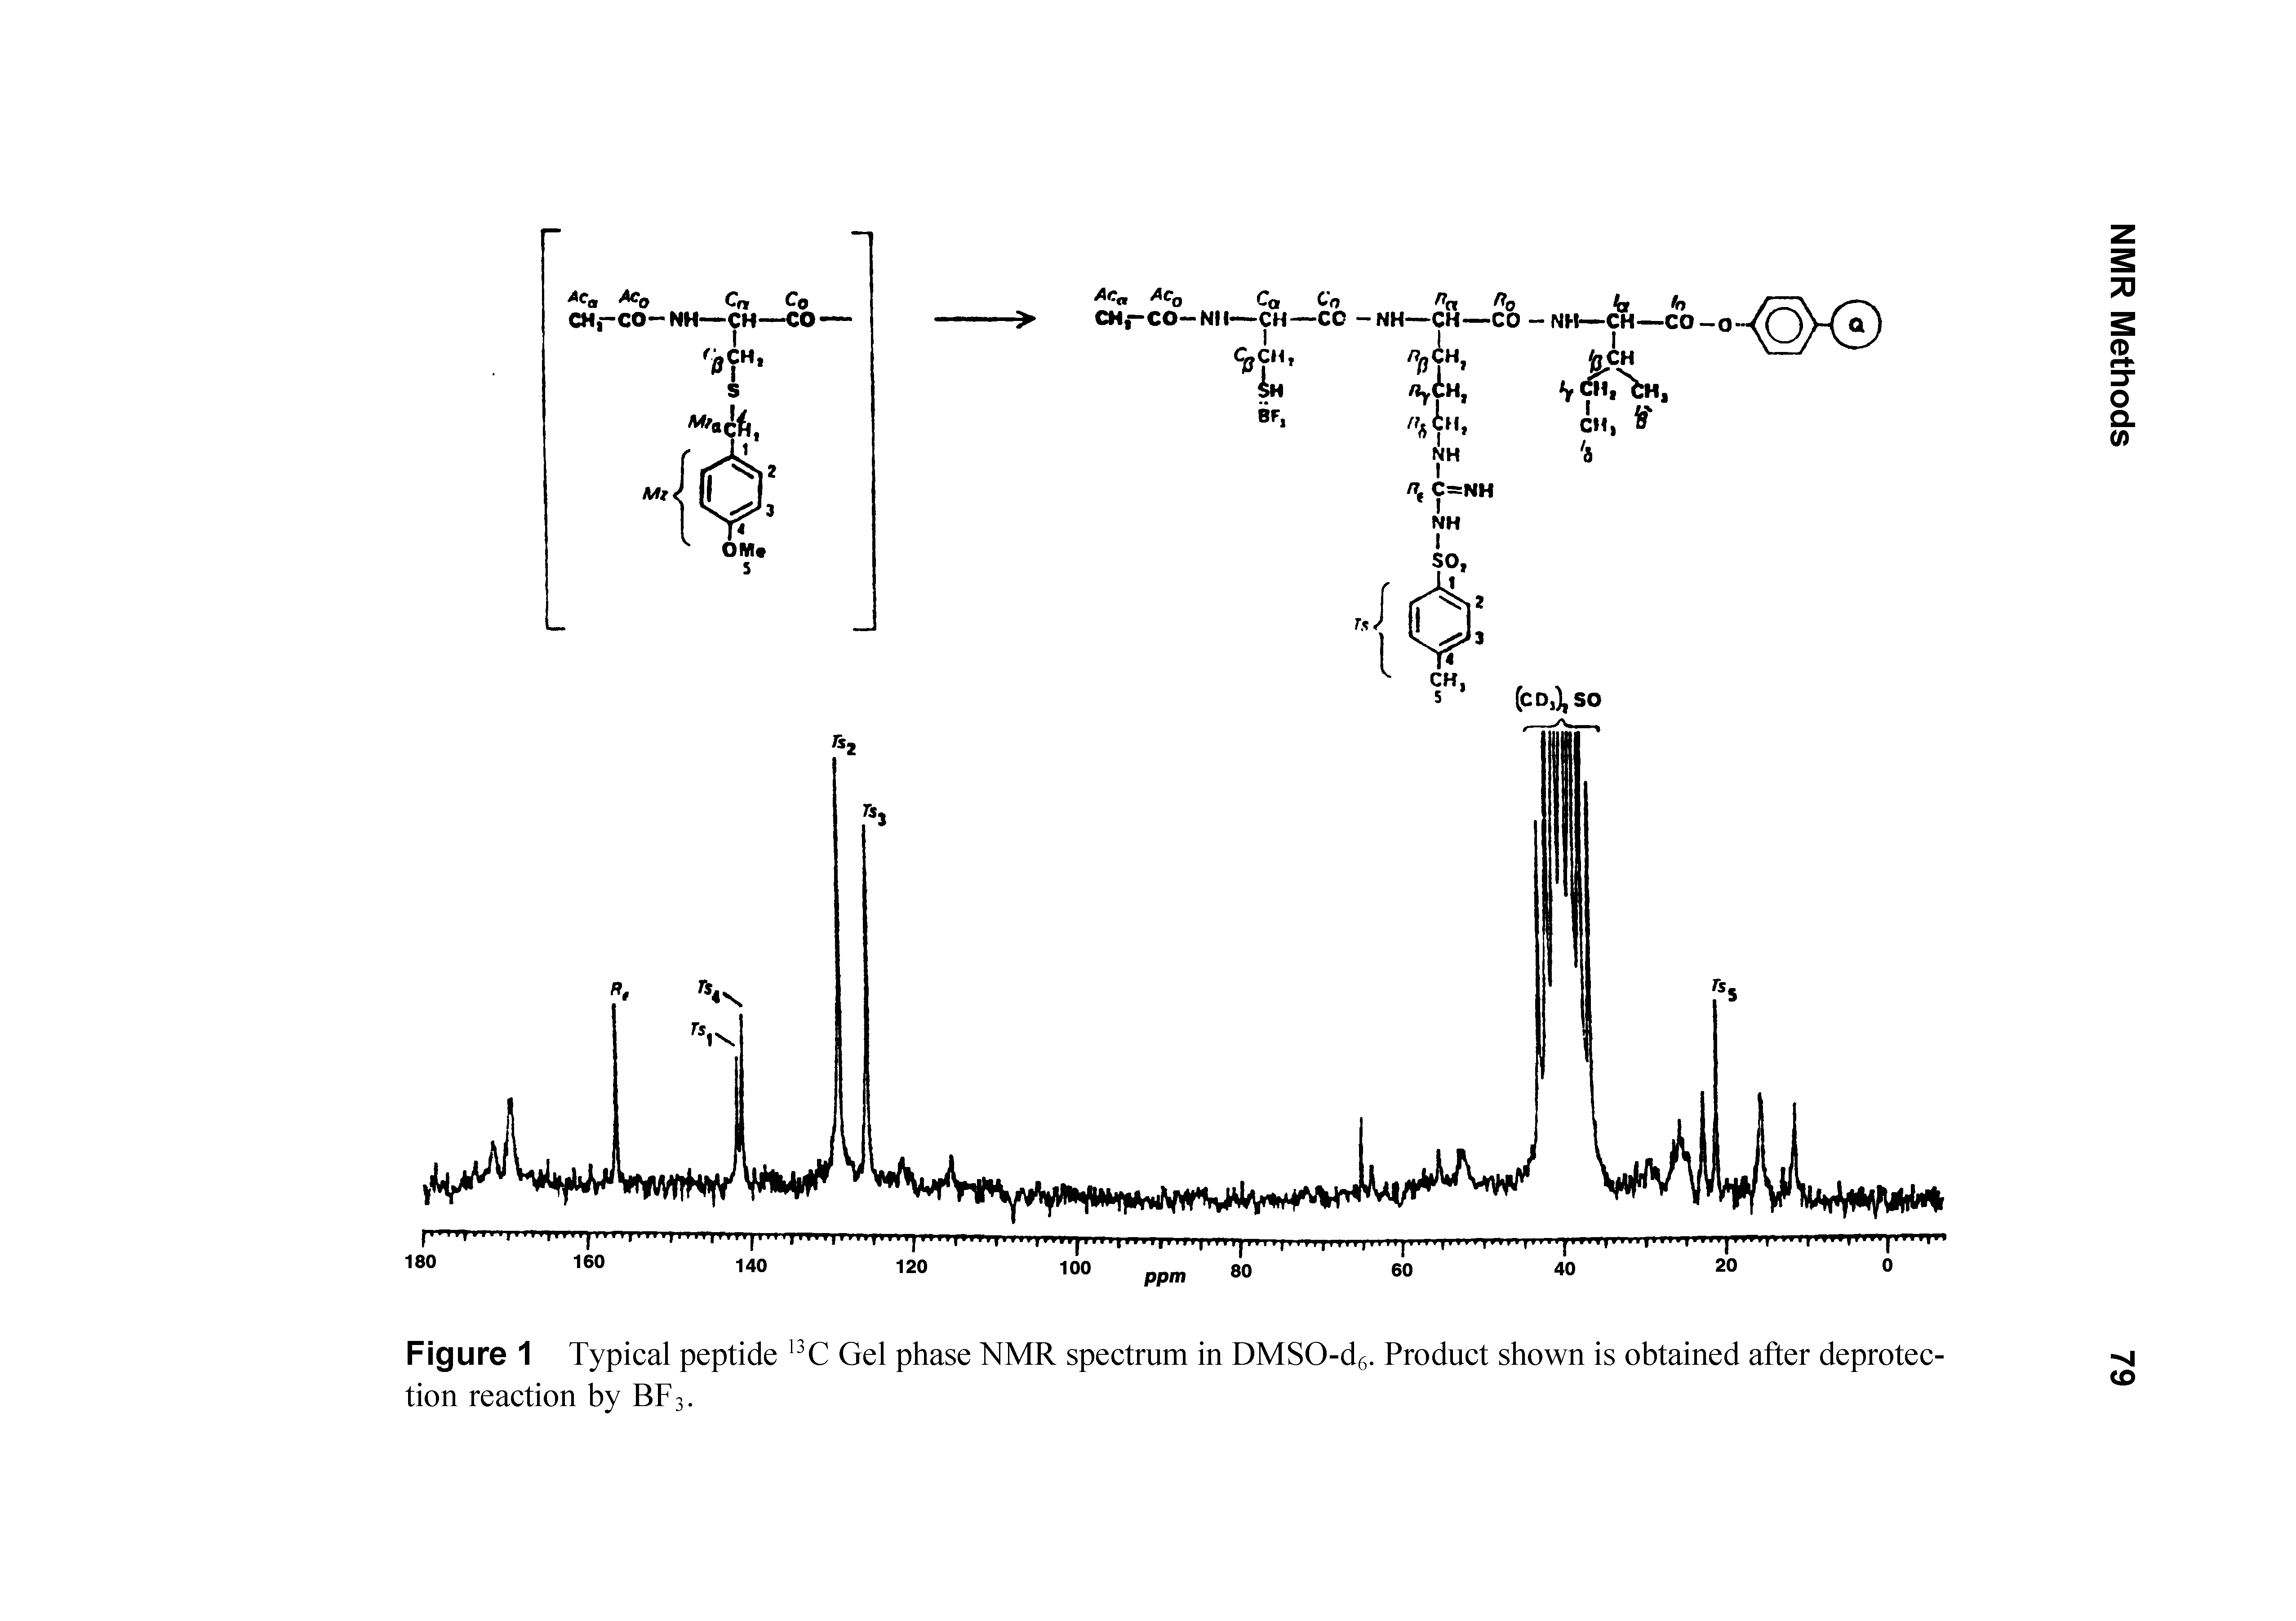 Figure 1 Typical peptide 13C Gel phase NMR spectrum in DMSO-d6. Product shown is obtained after deprotection reaction by BF 3.